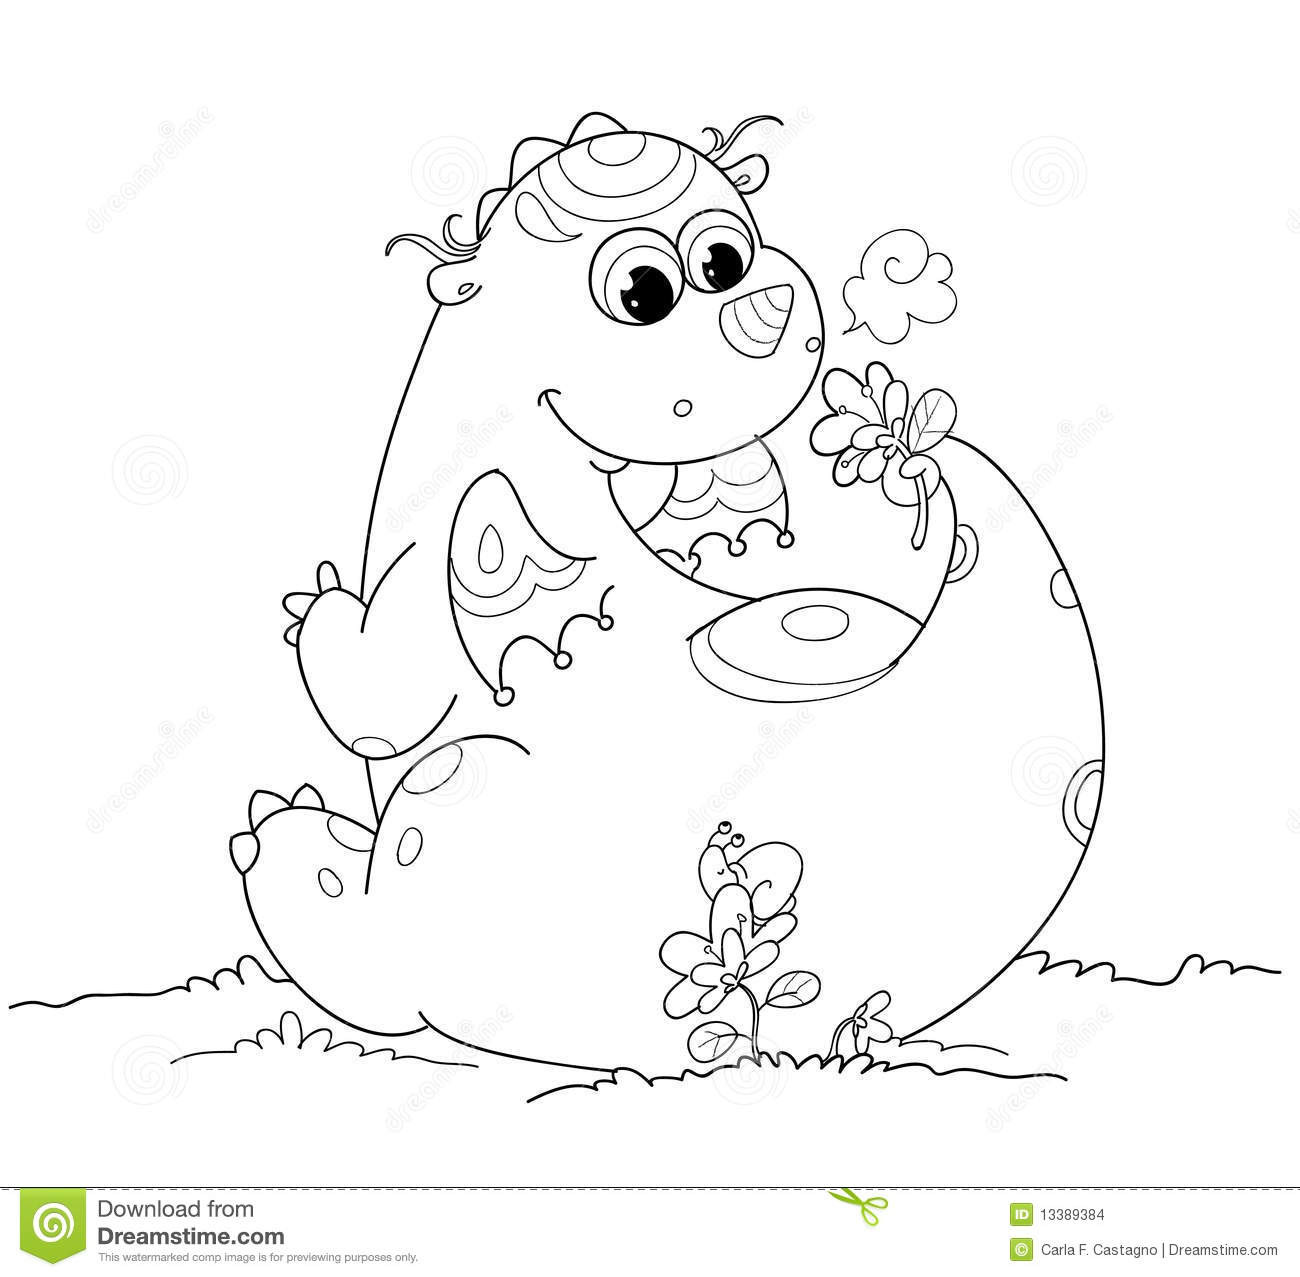 Baby Dragon Coloring Page
 Cute Coloring Baby Dragon Stock Image